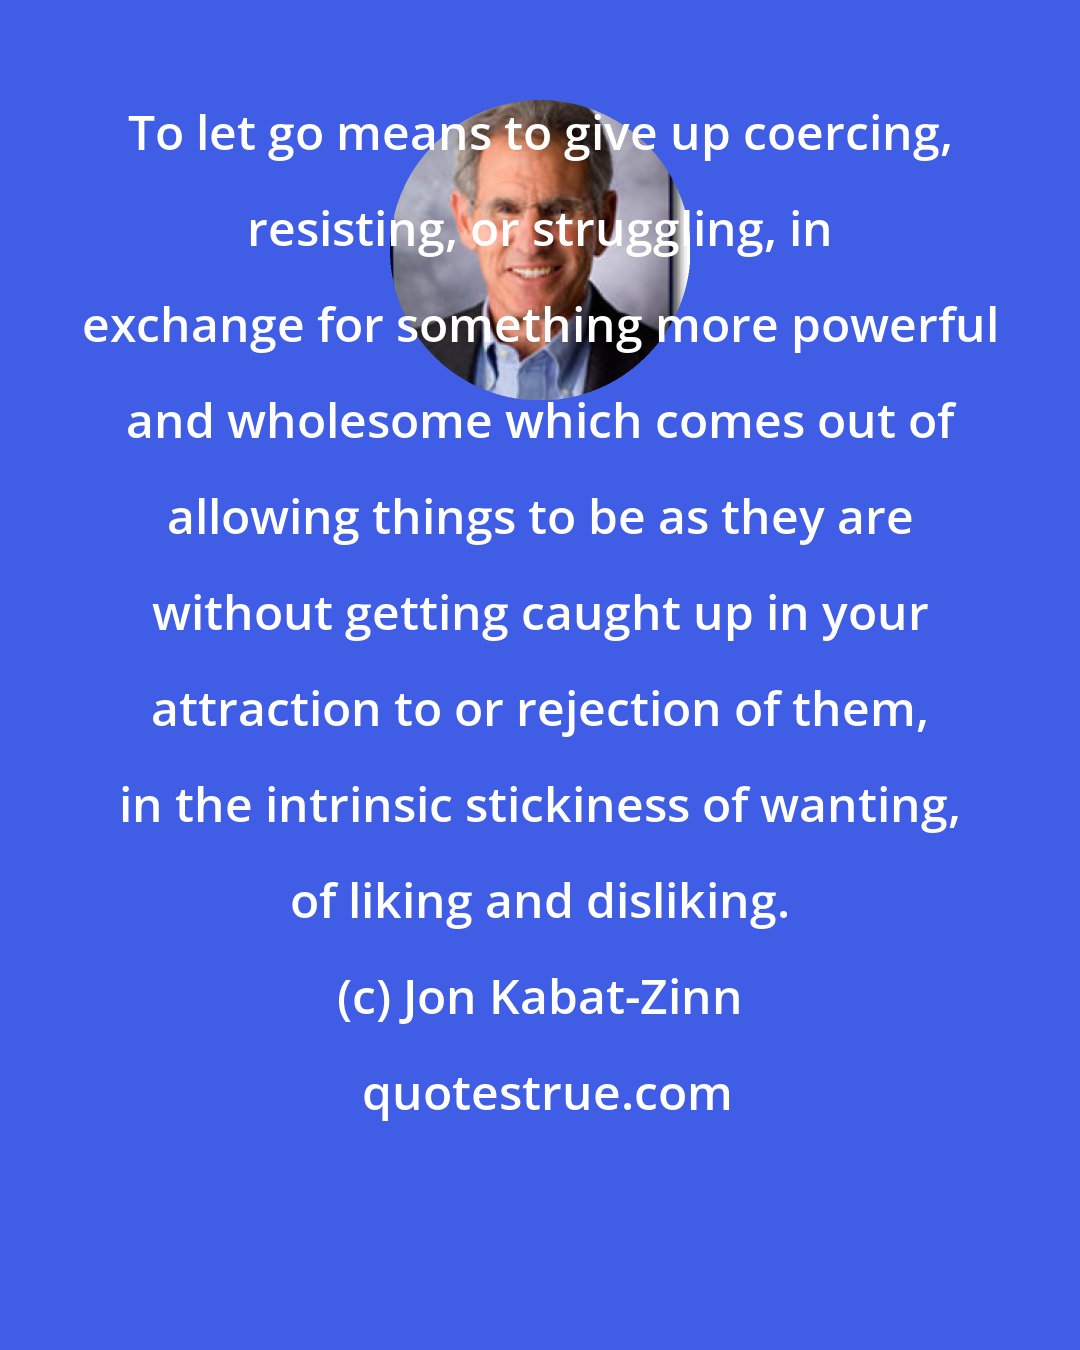 Jon Kabat-Zinn: To let go means to give up coercing, resisting, or struggling, in exchange for something more powerful and wholesome which comes out of allowing things to be as they are without getting caught up in your attraction to or rejection of them, in the intrinsic stickiness of wanting, of liking and disliking.